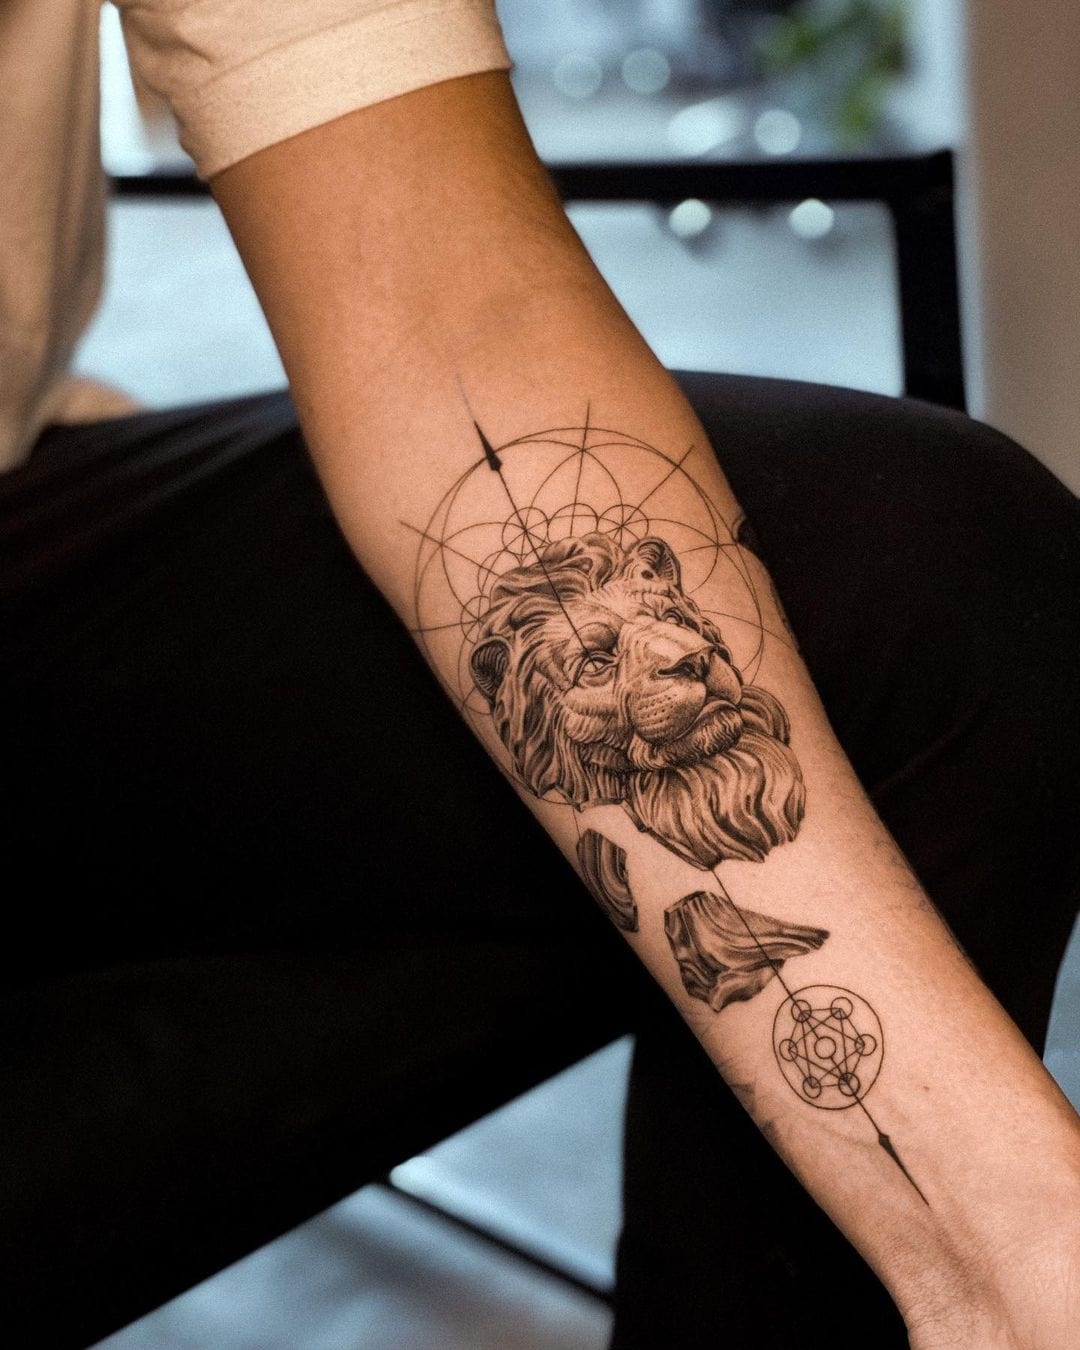 56 Lion Tattoo Ideas To Show Strength And Bravery | Lion shoulder tattoo, Lion  tattoo, Tattoos